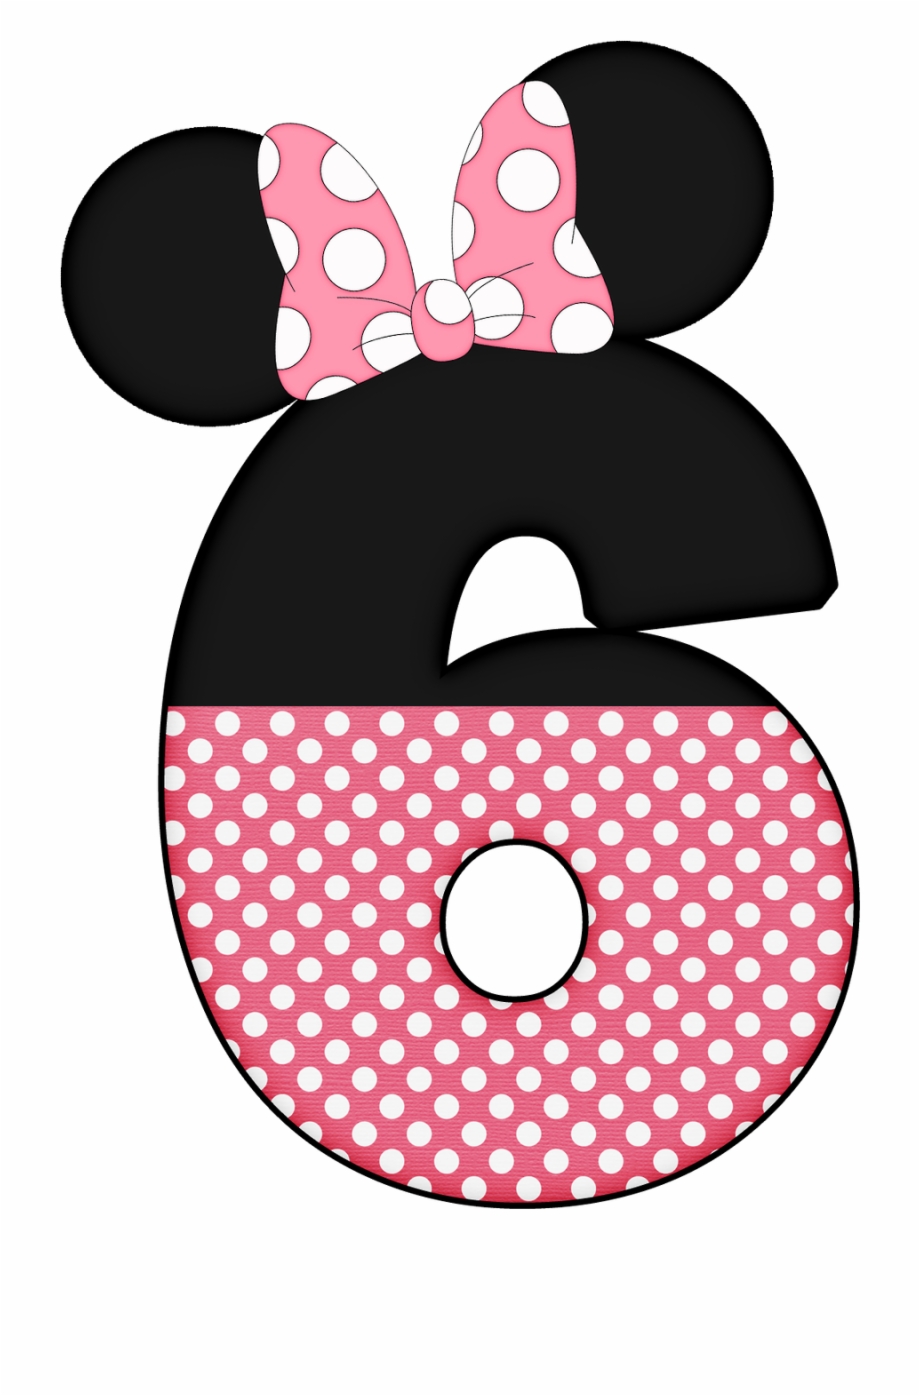 Free Minnie Mouse 1 Png, Download Free Minnie Mouse 1 Png png images ...